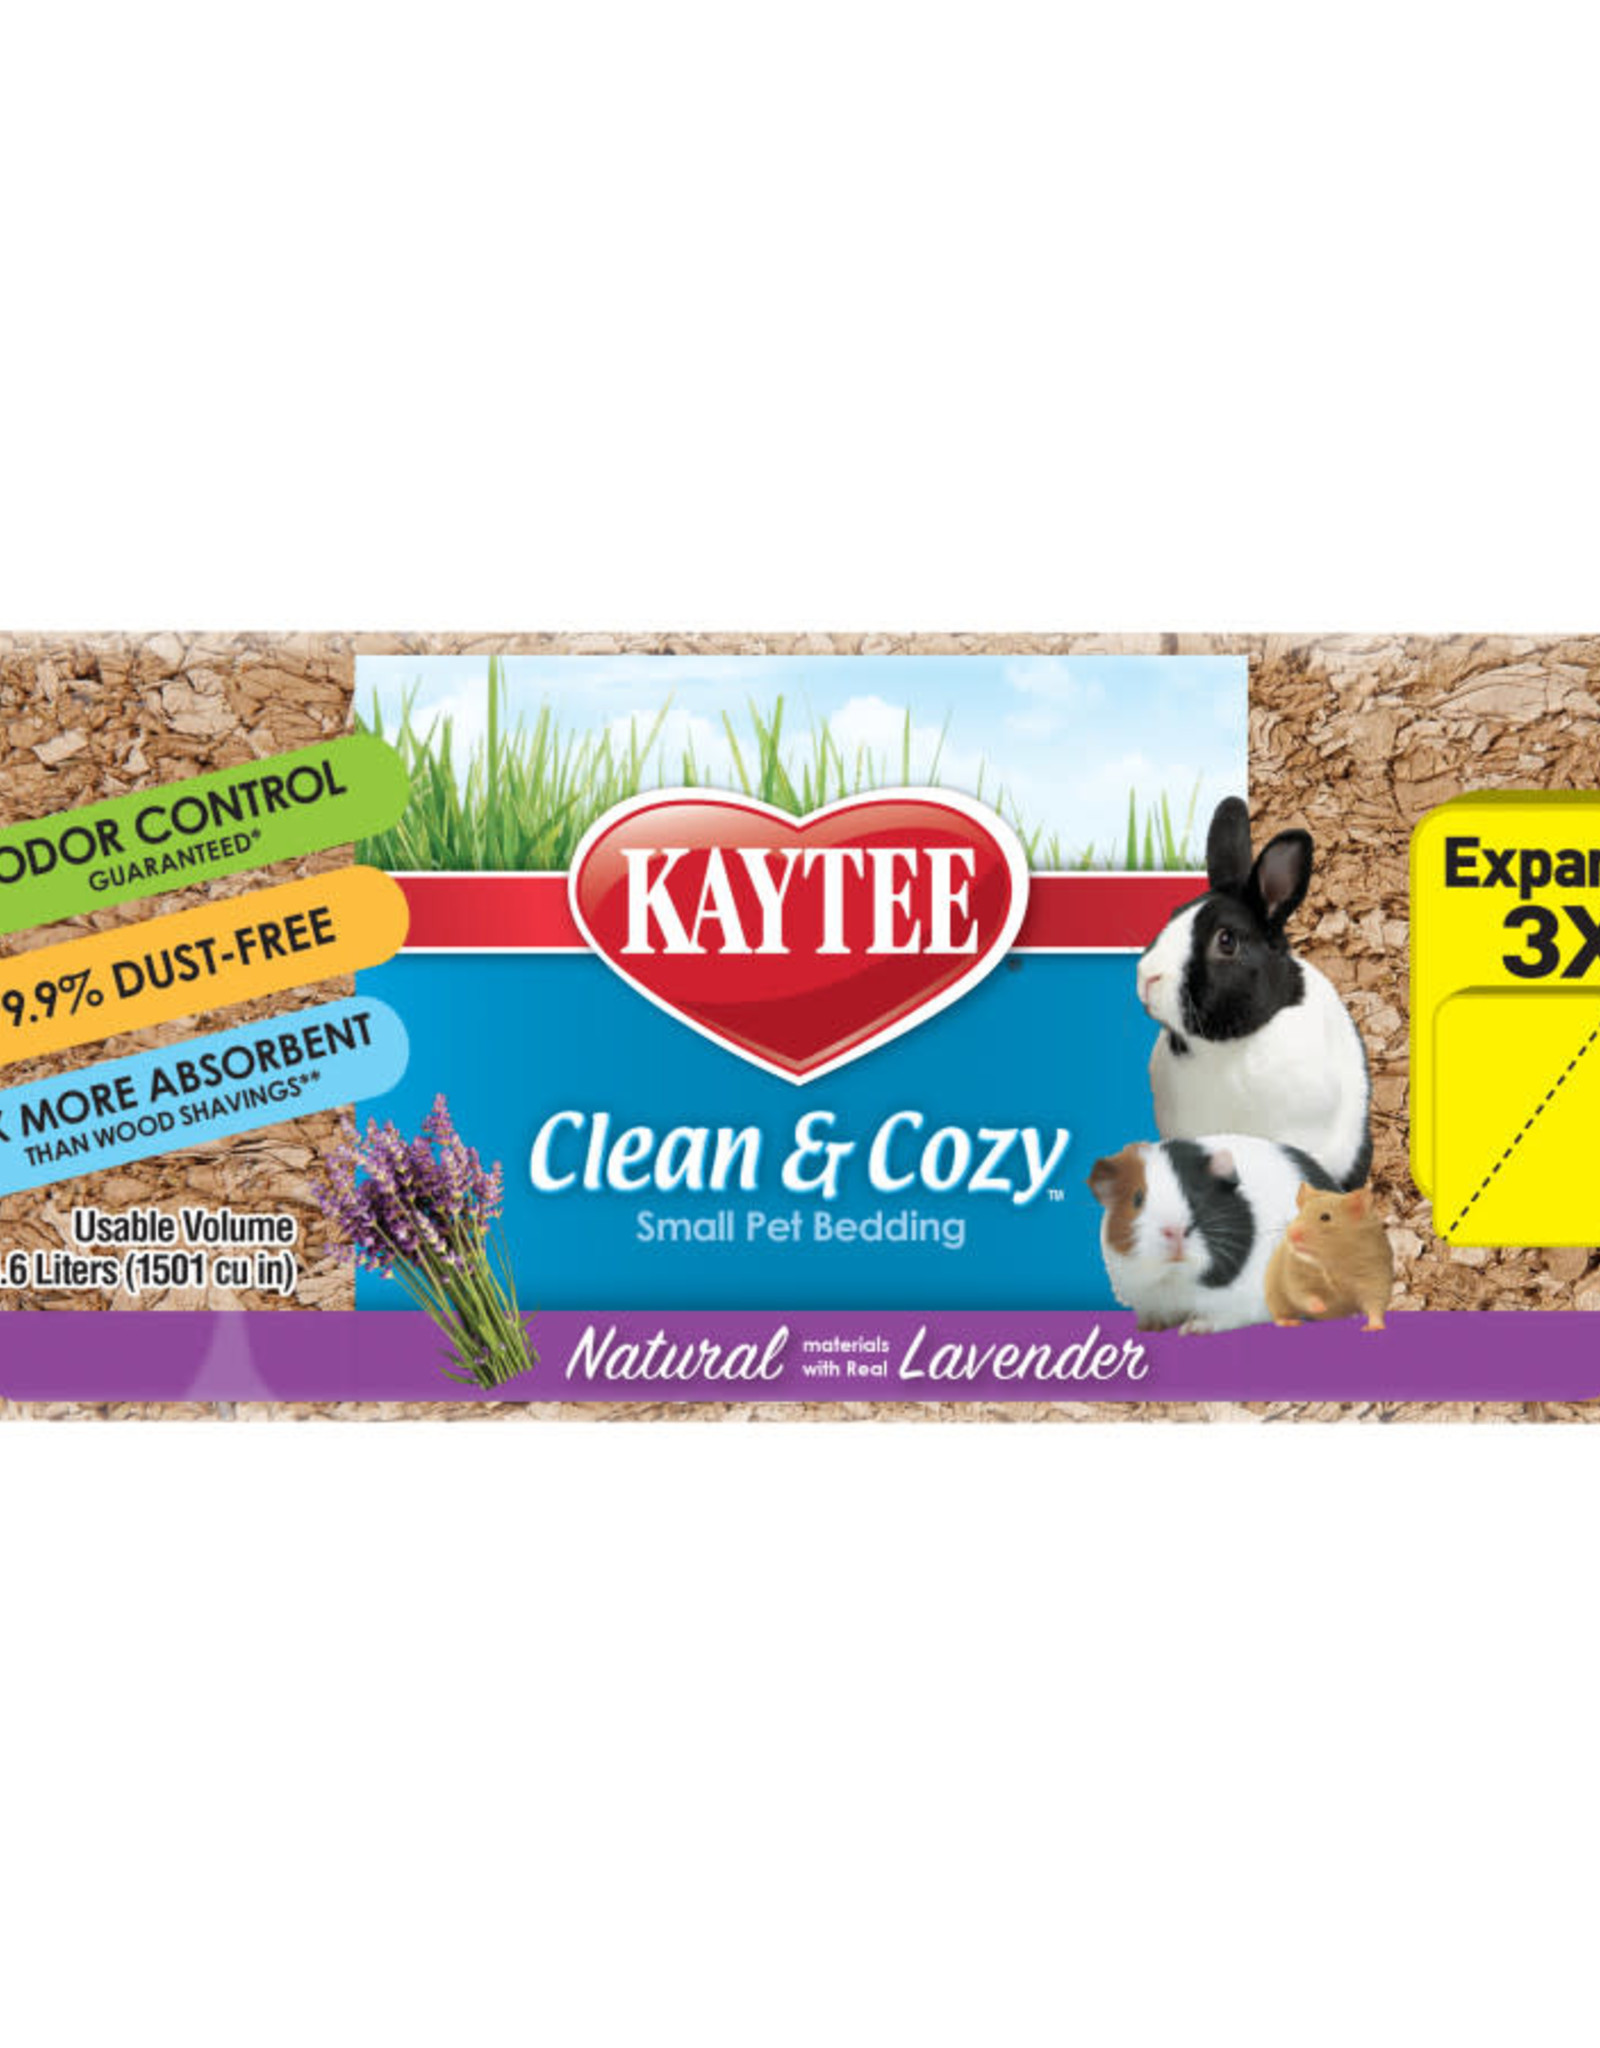 CENTRAL - KAYTEE PRODUCTS KAYTEE BEDDING- CLEAN AND COZY- NATURAL- LAVENDER- 24.6L